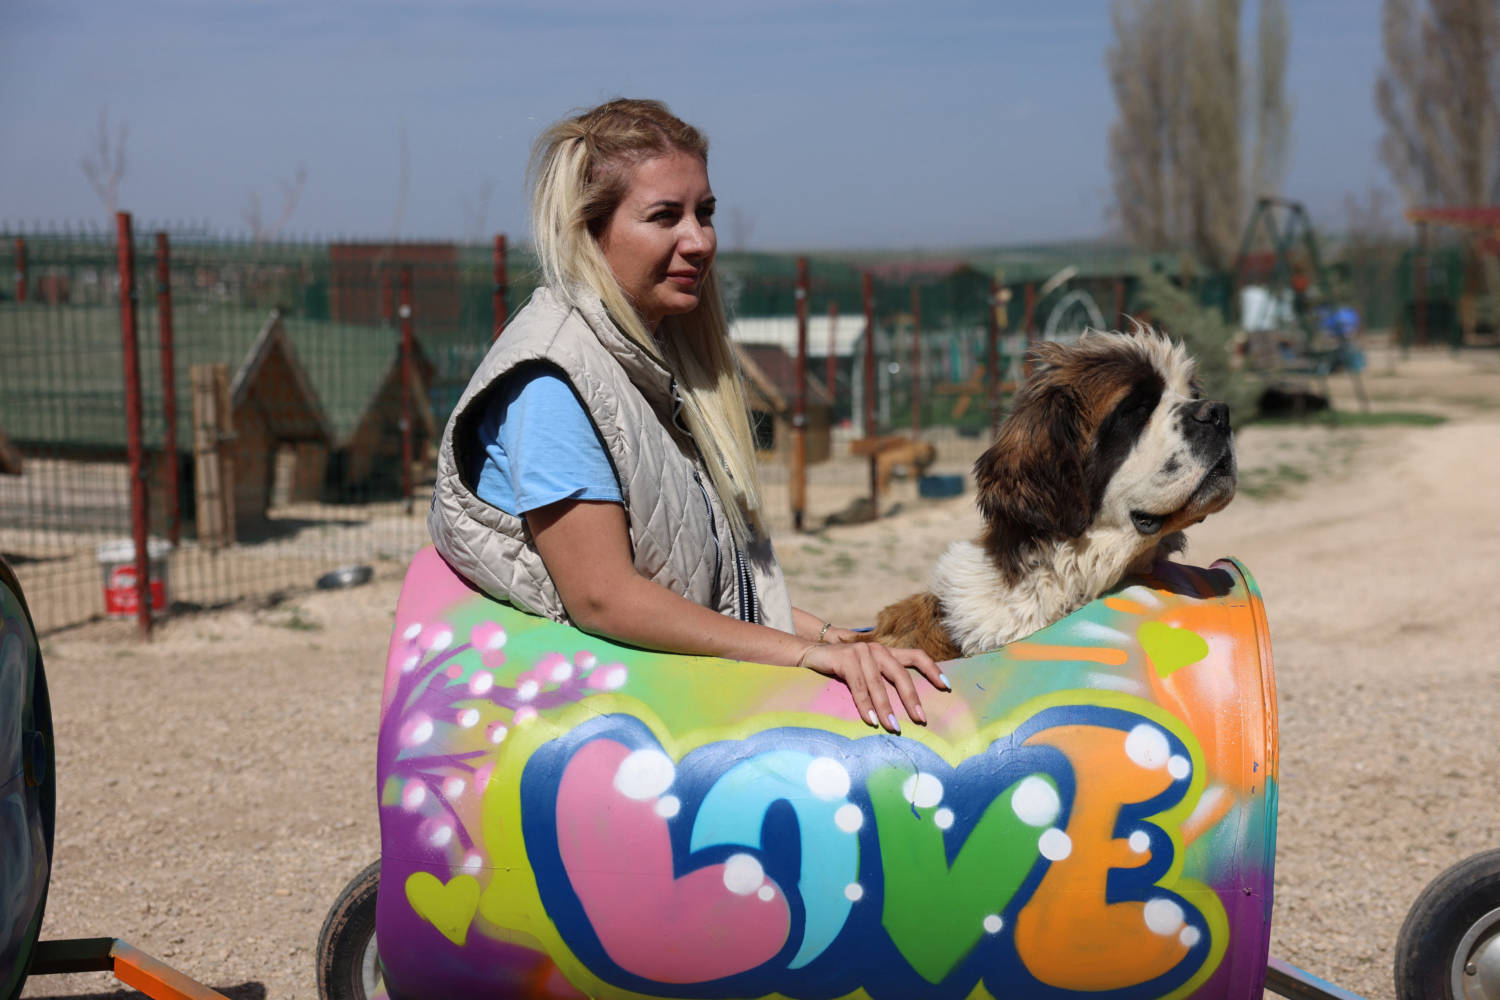 Chairwoman Of The Paws Holding On To Life Association Takes Disabled Dogs For A Ride With A Makeshift Train In Ankara